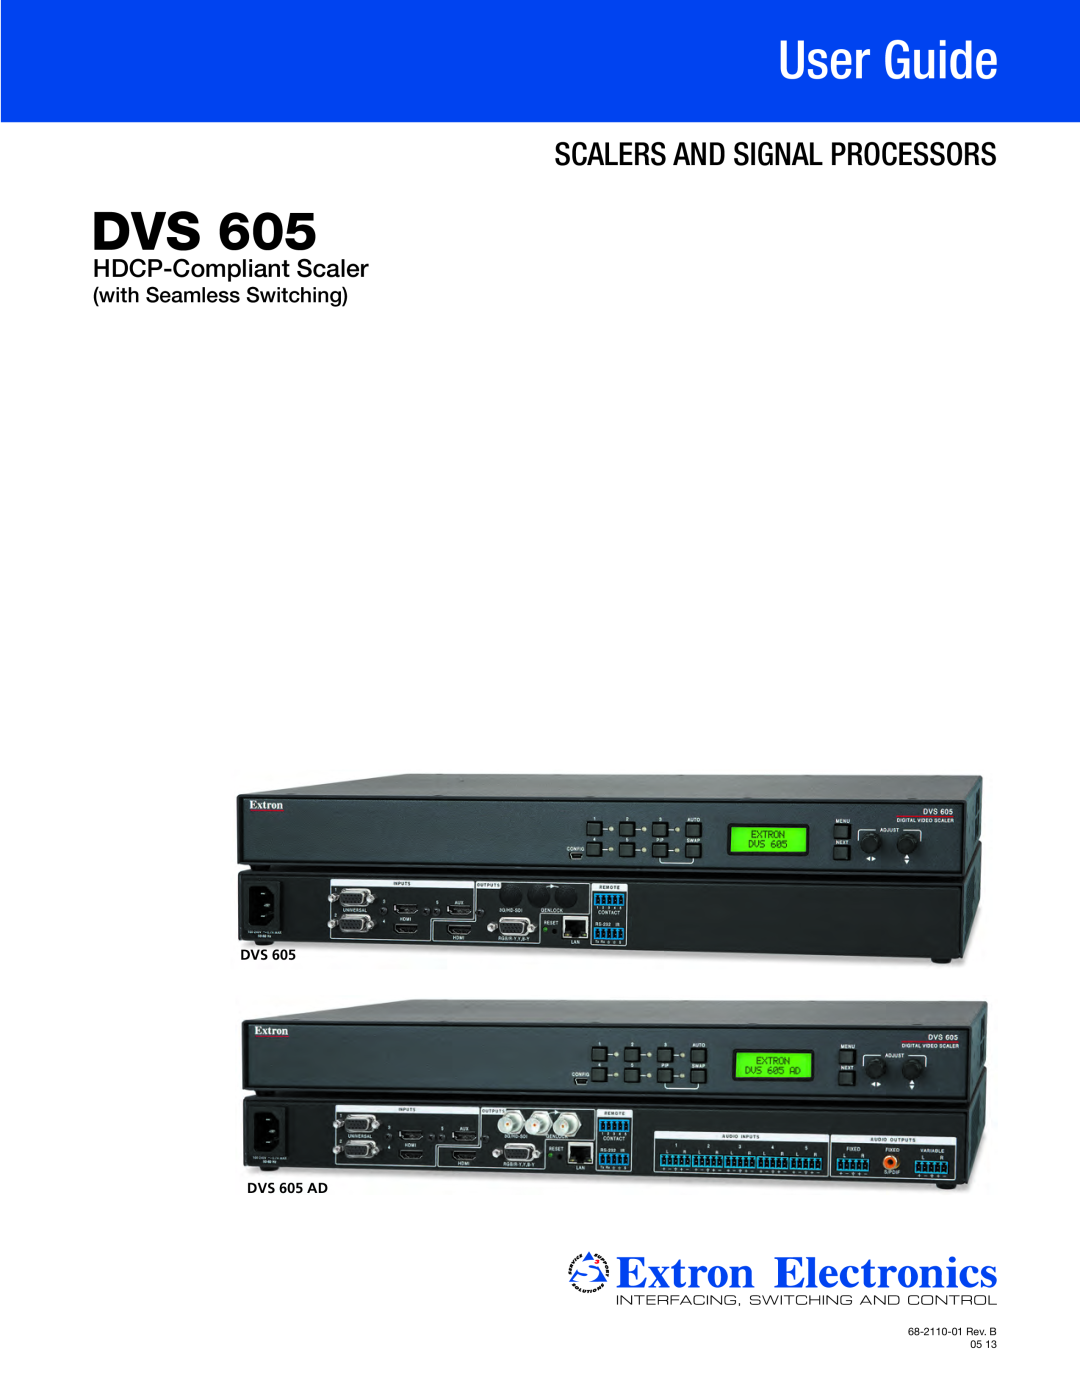 Extron electronic DVS 605 manual User Guide, Scalers And Signal Processors, HDCP-CompliantScaler, with Seamless Switching 